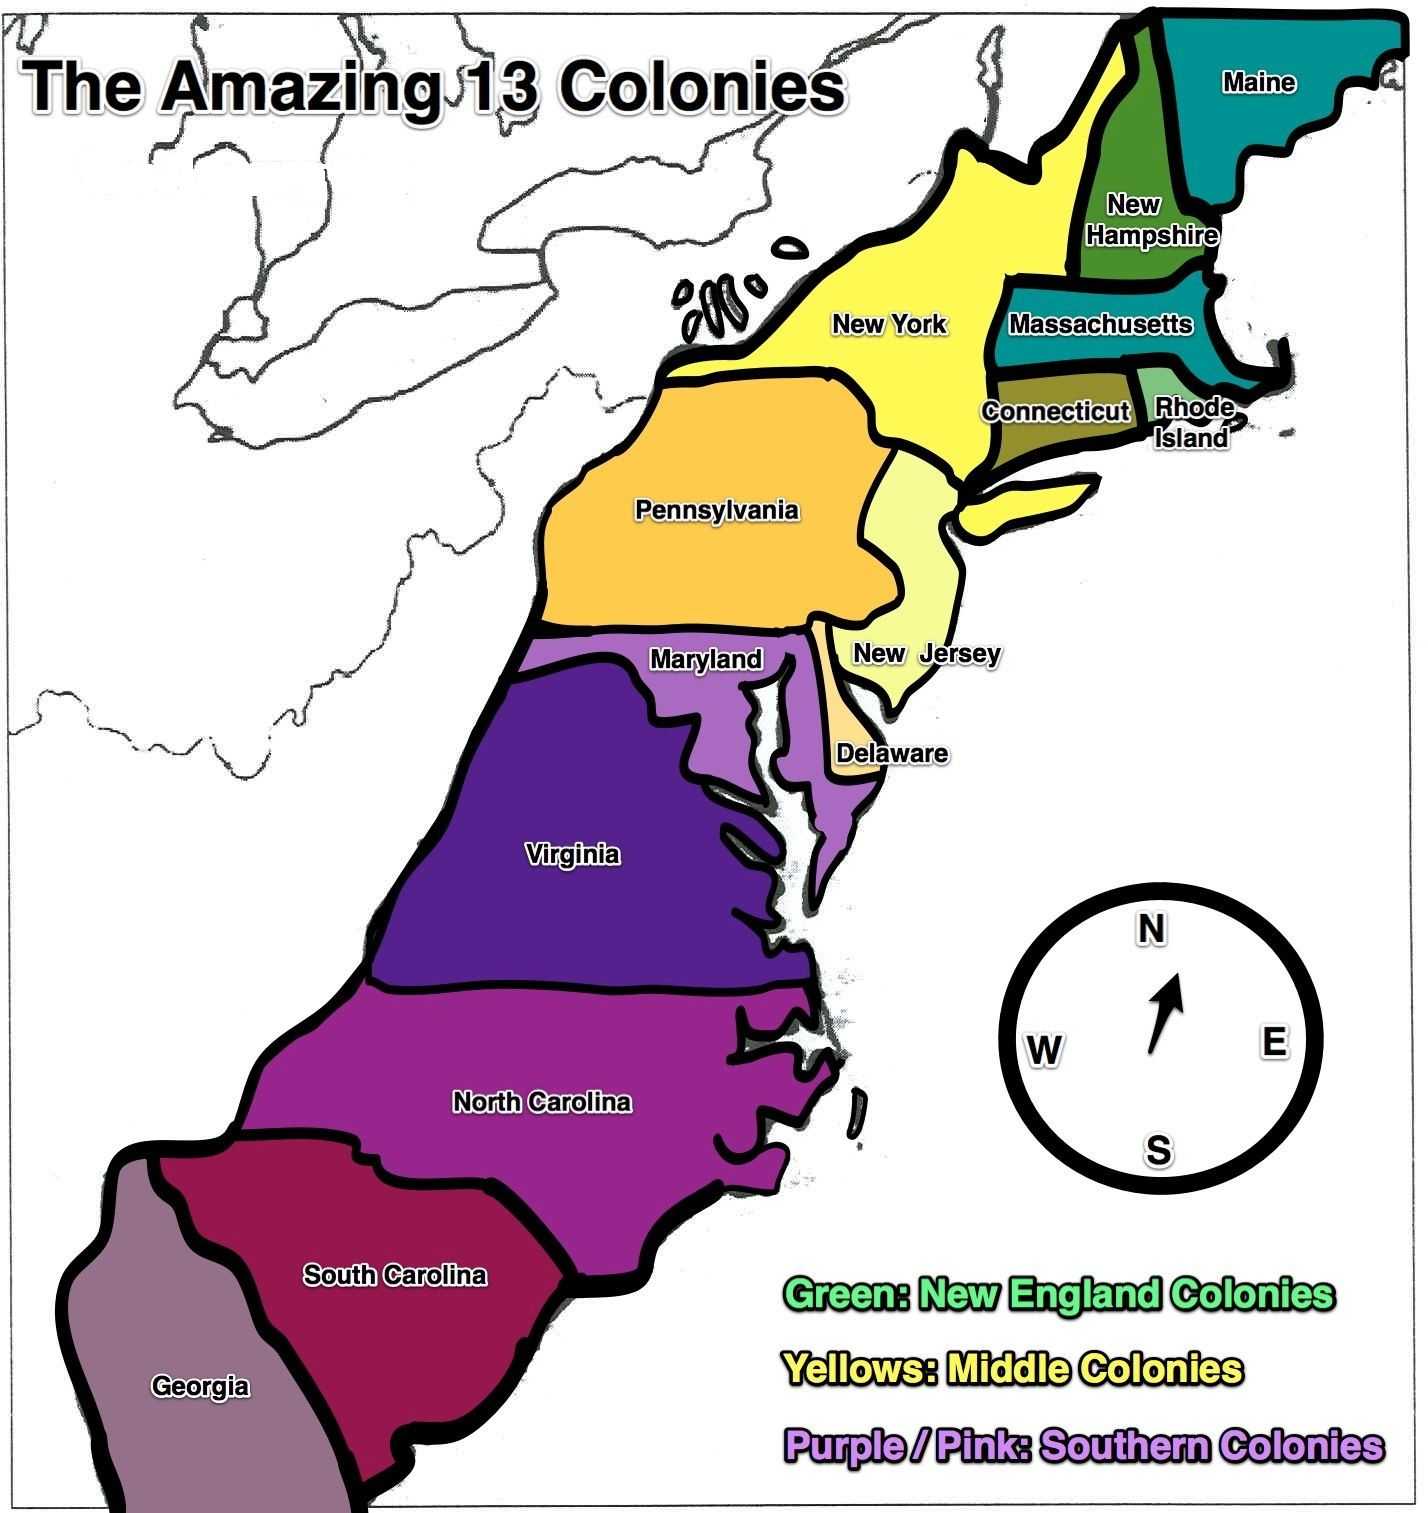 Congress In A Flash Worksheet Answers and 13 Colonies Map Free Home School